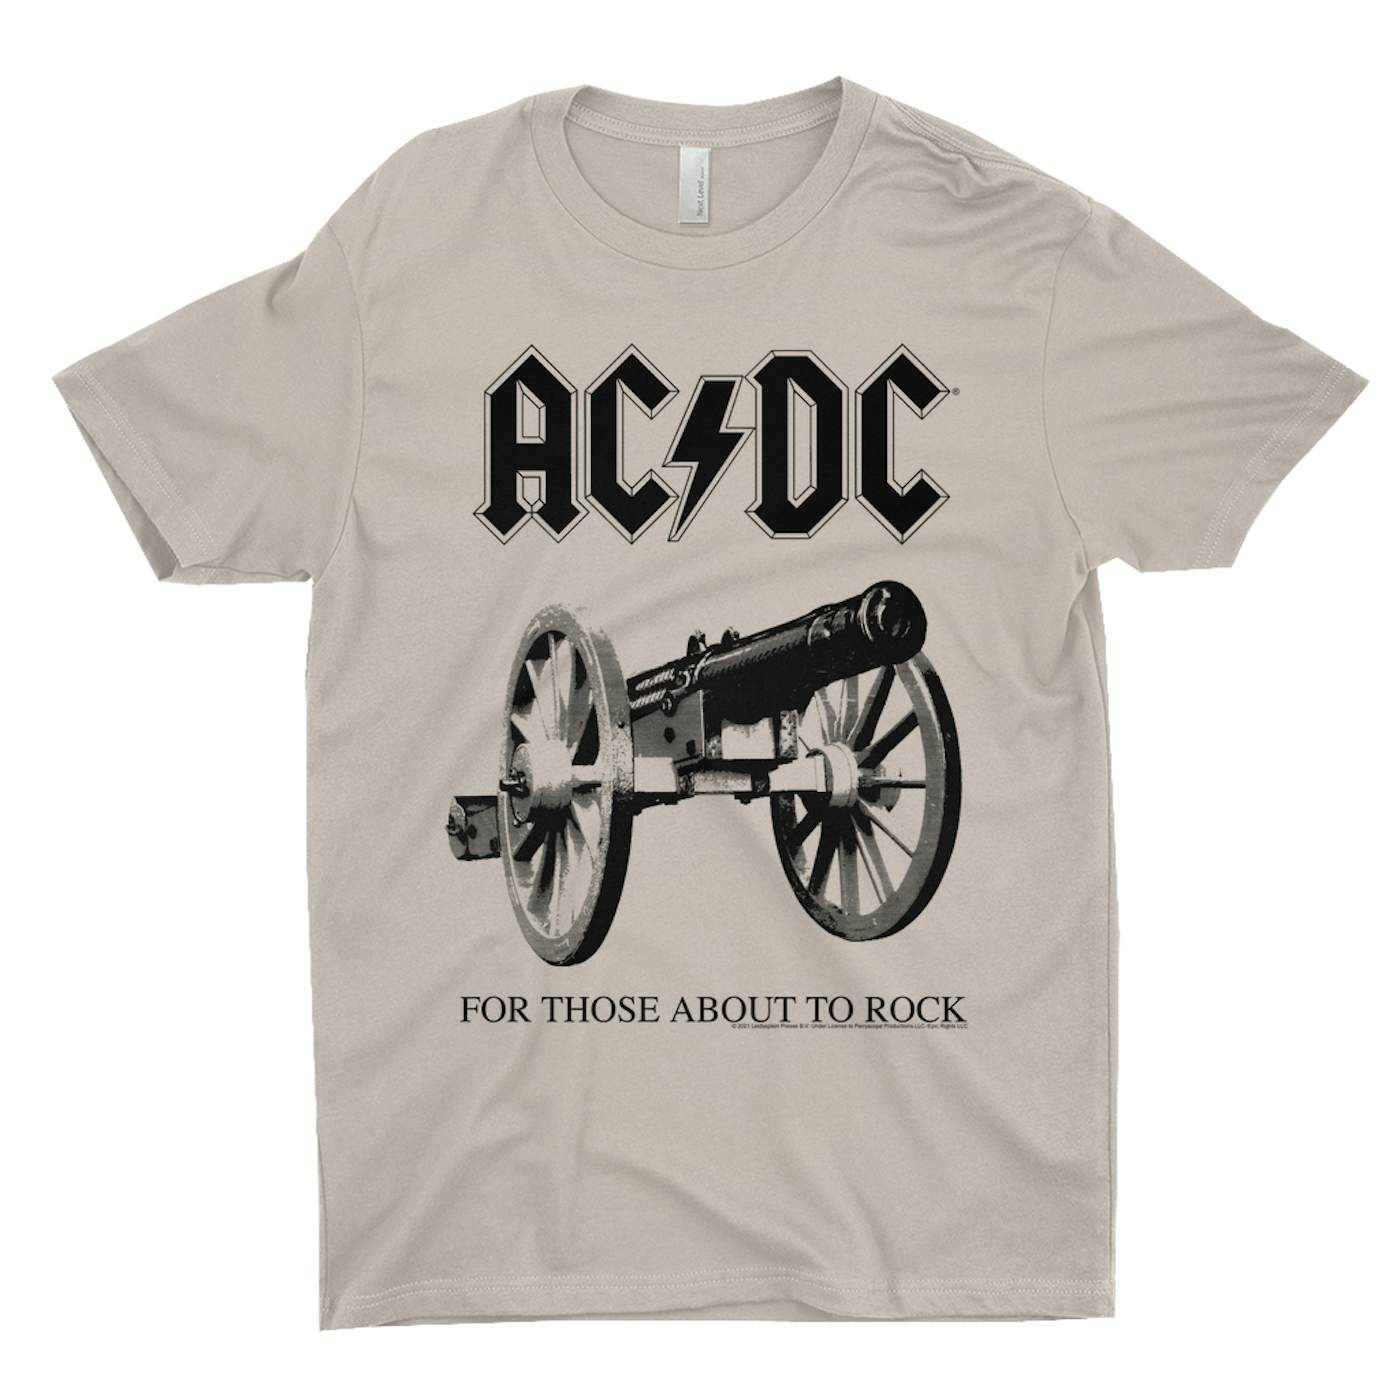 Black For | Cannon About To Image T-Shirt AC/DC Shirt Rock Those